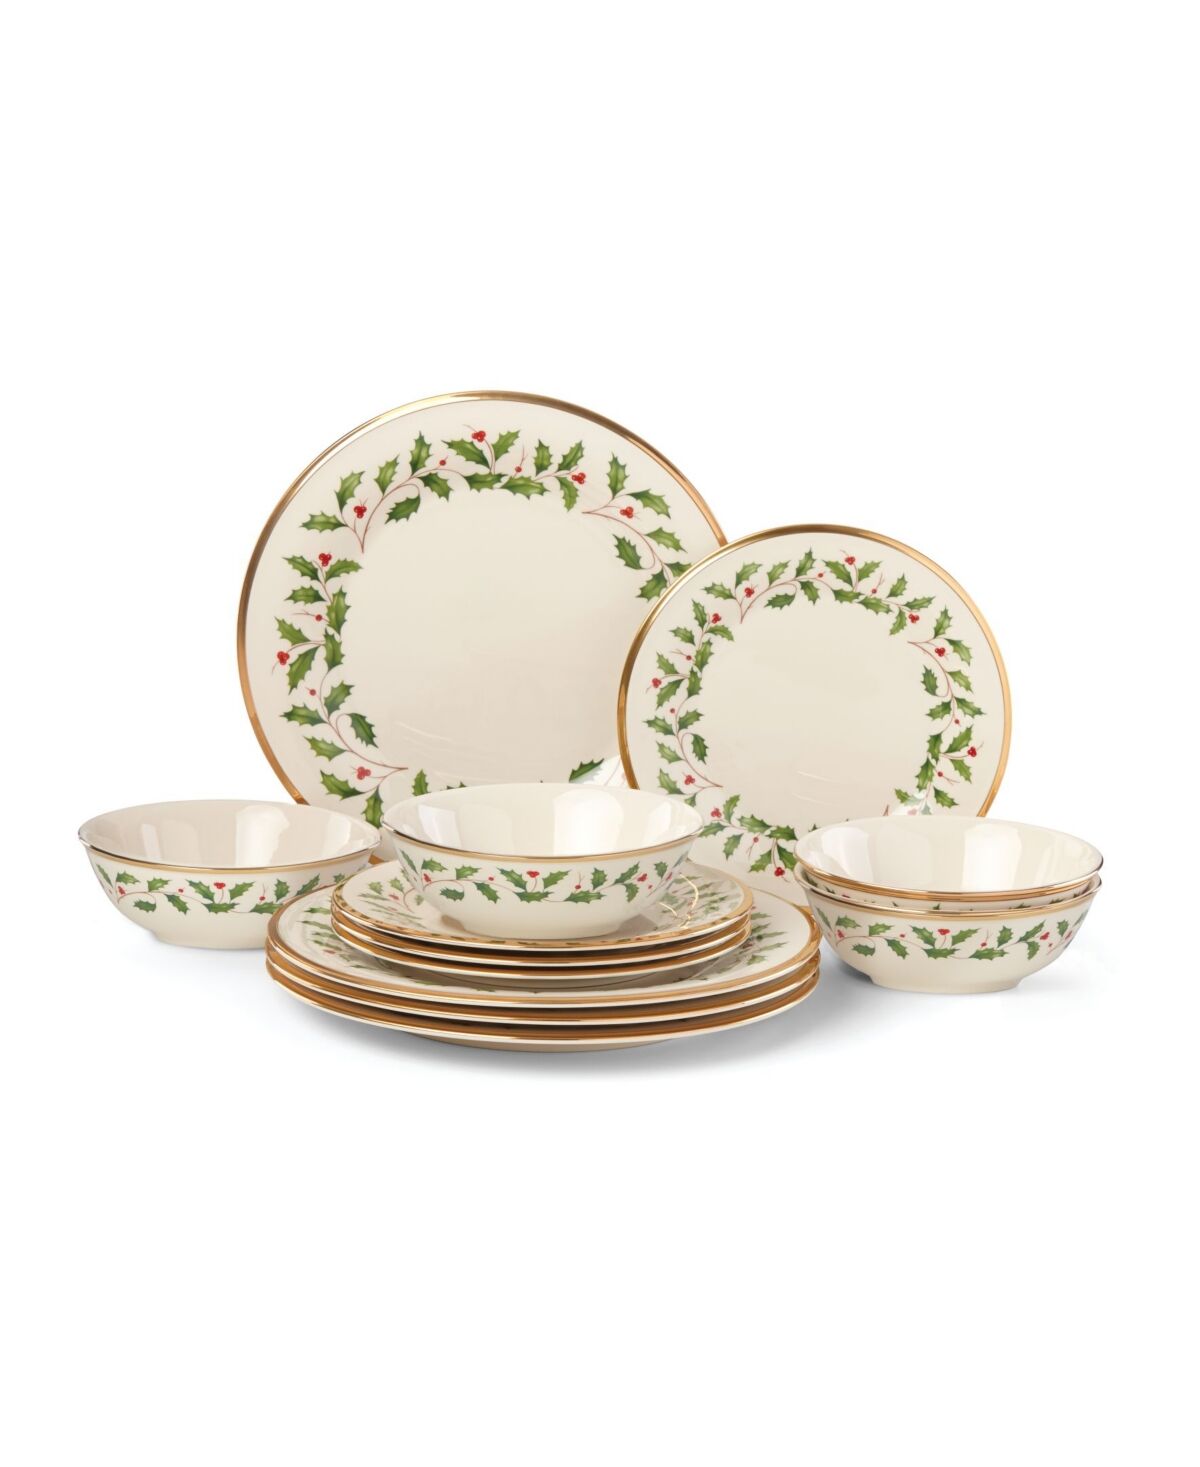 Lenox Holiday 12 Pc. Dinnerware Set, Service for 4 - Red  Green And Ivory